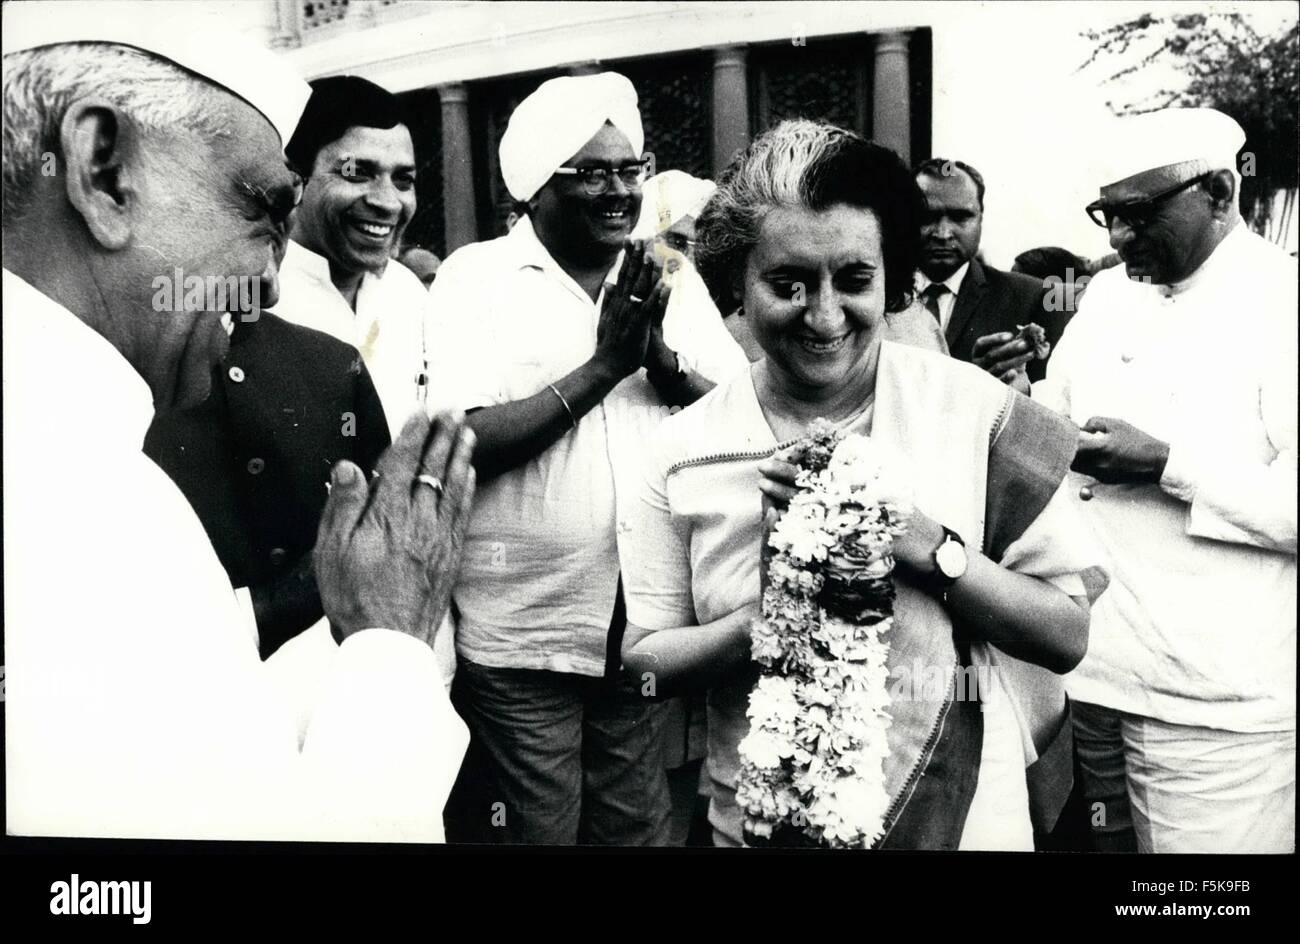 1972 - Prime Minister Mrs. Indira Gandhi with a garl and in hand moves around meeting her party members at the reception held in her honour of the congress party victory in state legislature elections held in India recently, She had addressed more than 250 public meetings all over India seeking mandate of the people even in states, so that she can implement her programme and policies to eradicate poverty in the country. © Keystone Pictures USA/ZUMAPRESS.com/Alamy Live News Stock Photo